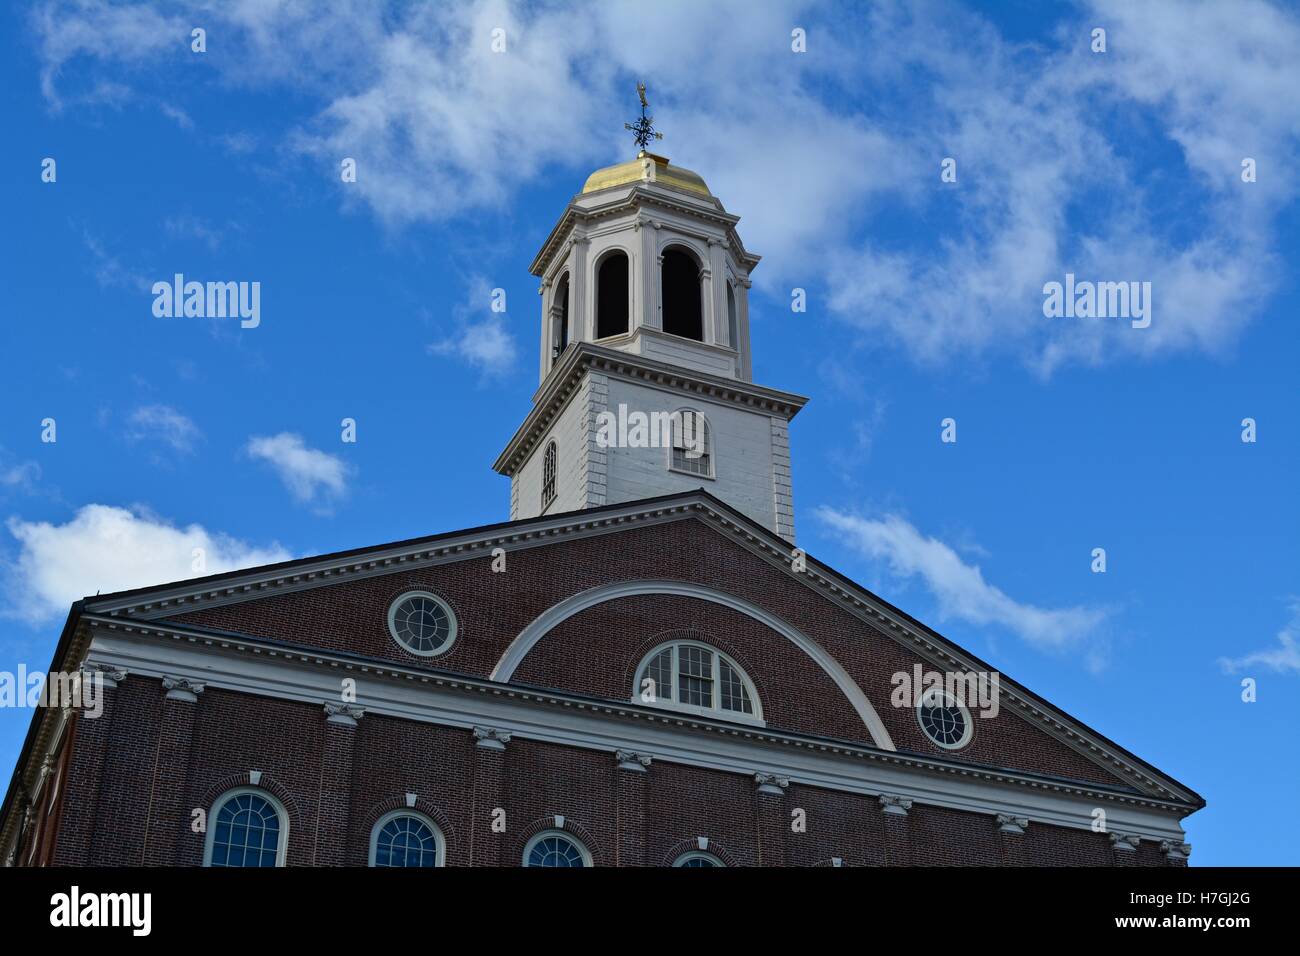 Faneuil Hall market along side Quincy Market and the Freedom Trail in downtown Boston, Massachusetts. Stock Photo